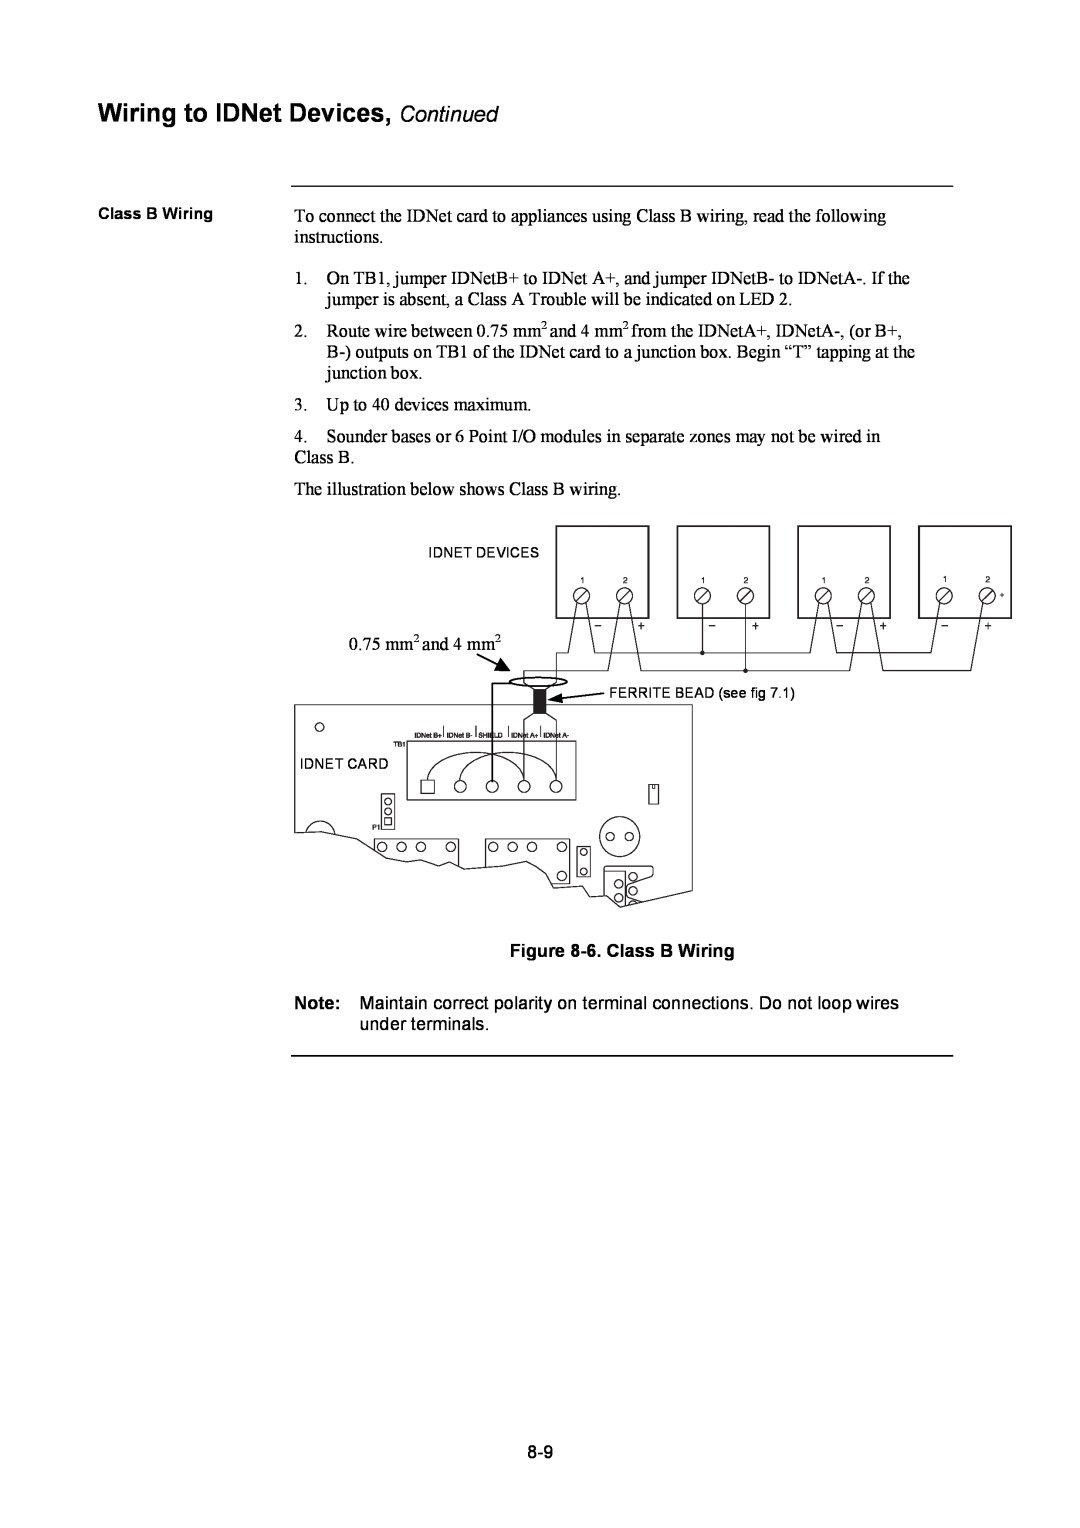 Tyco 4100U installation manual Wiring to IDNet Devices, Continued, 6.Class B Wiring 